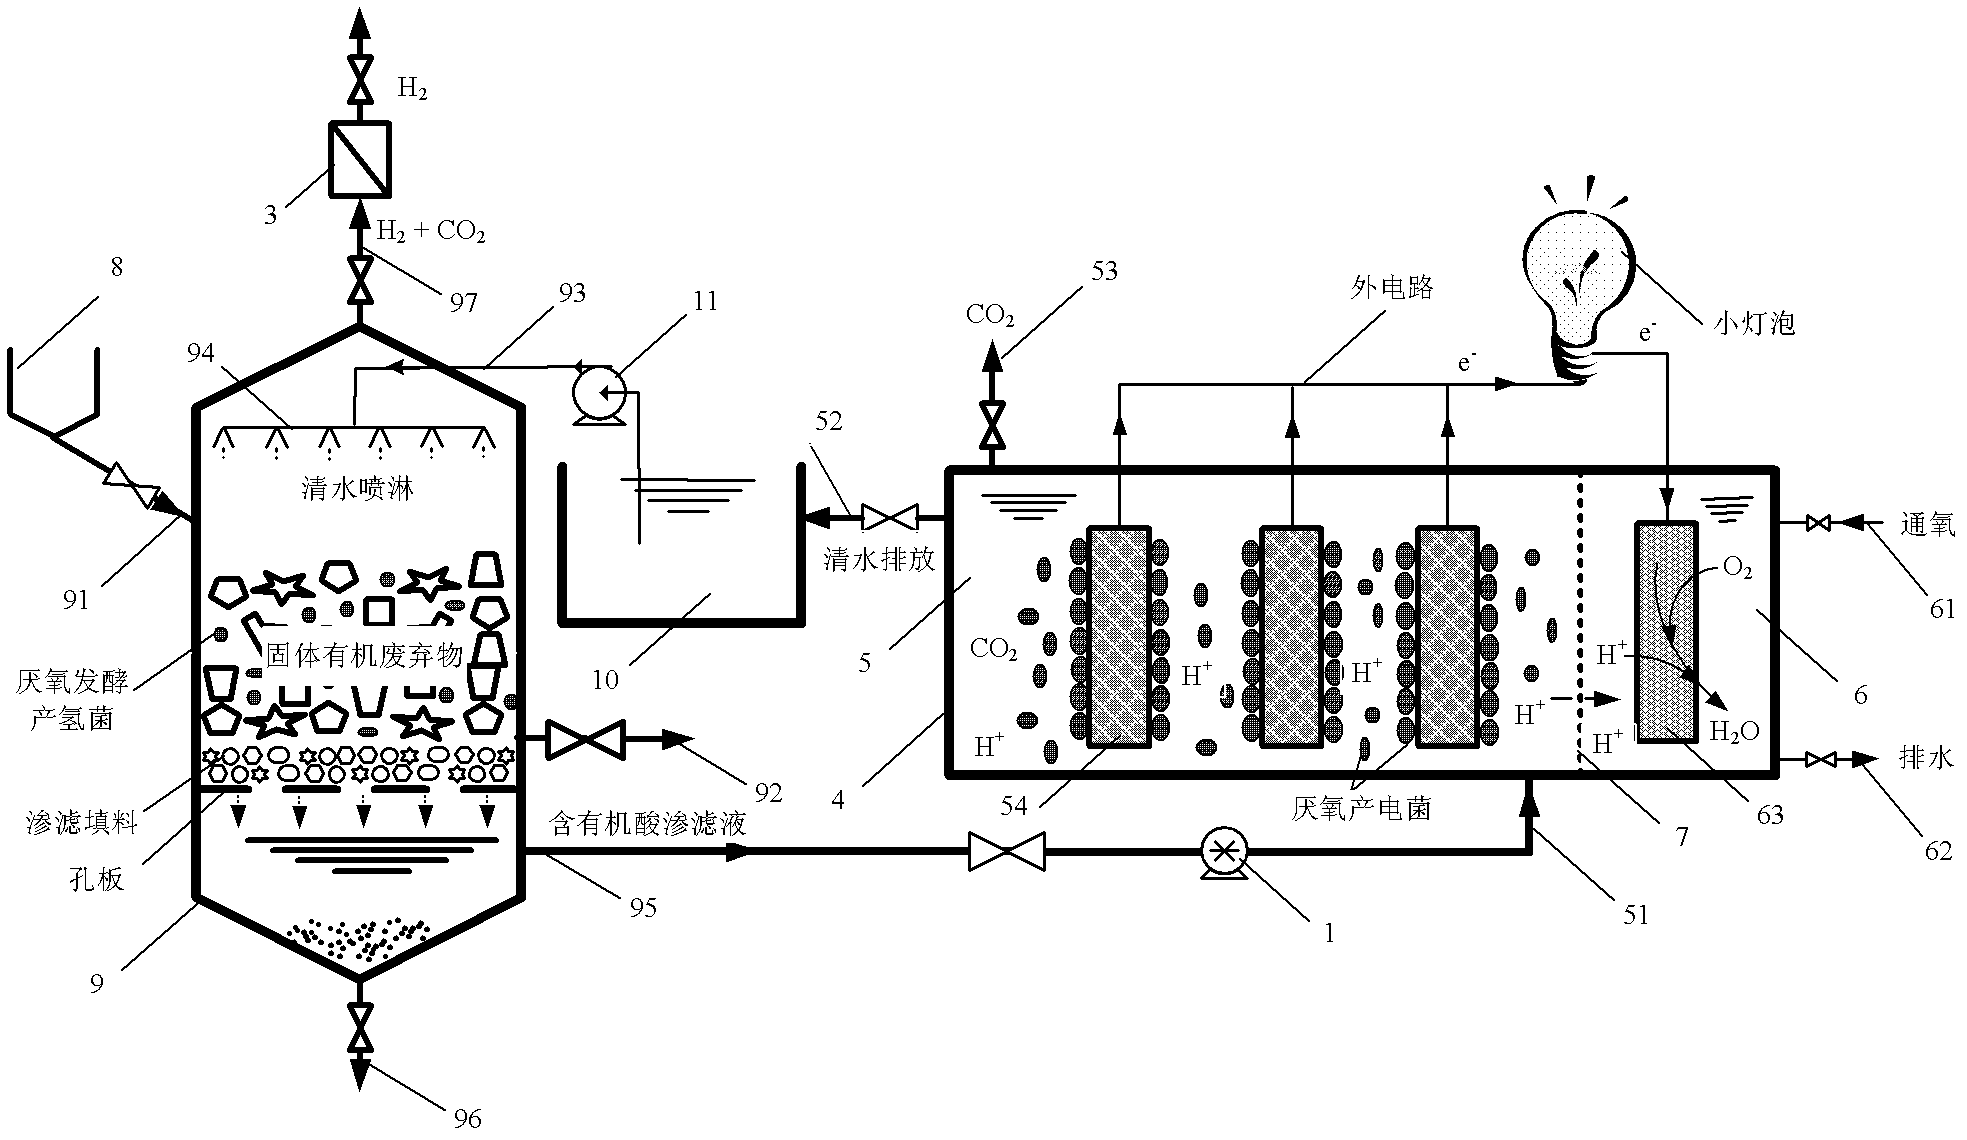 A method and device for co-producing hydrogen and electricity from organic waste